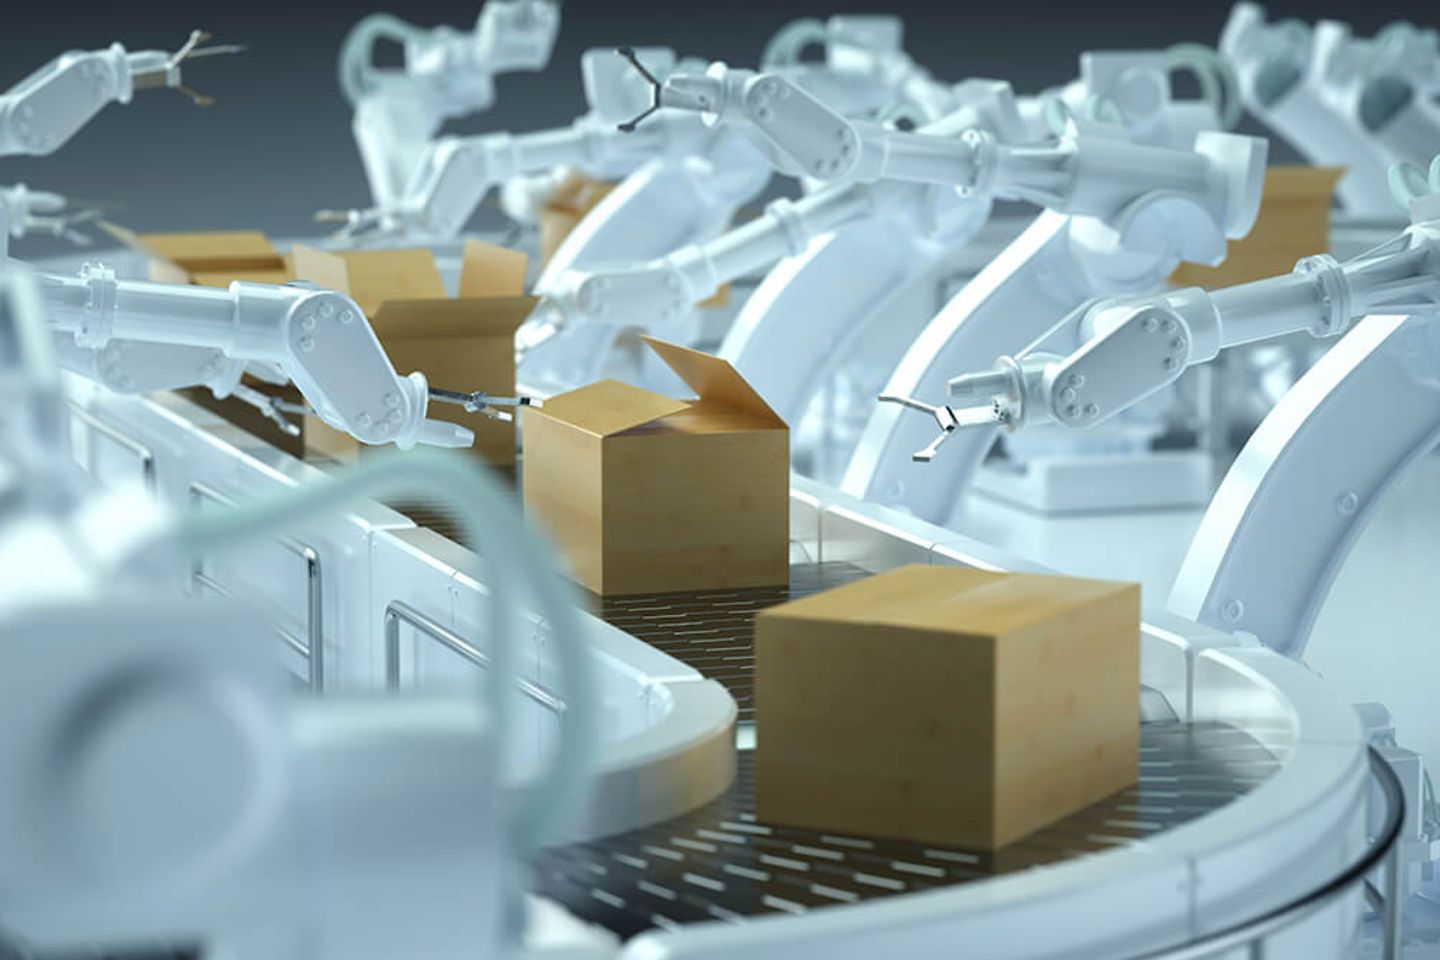 production line with robotic arms packing boxes